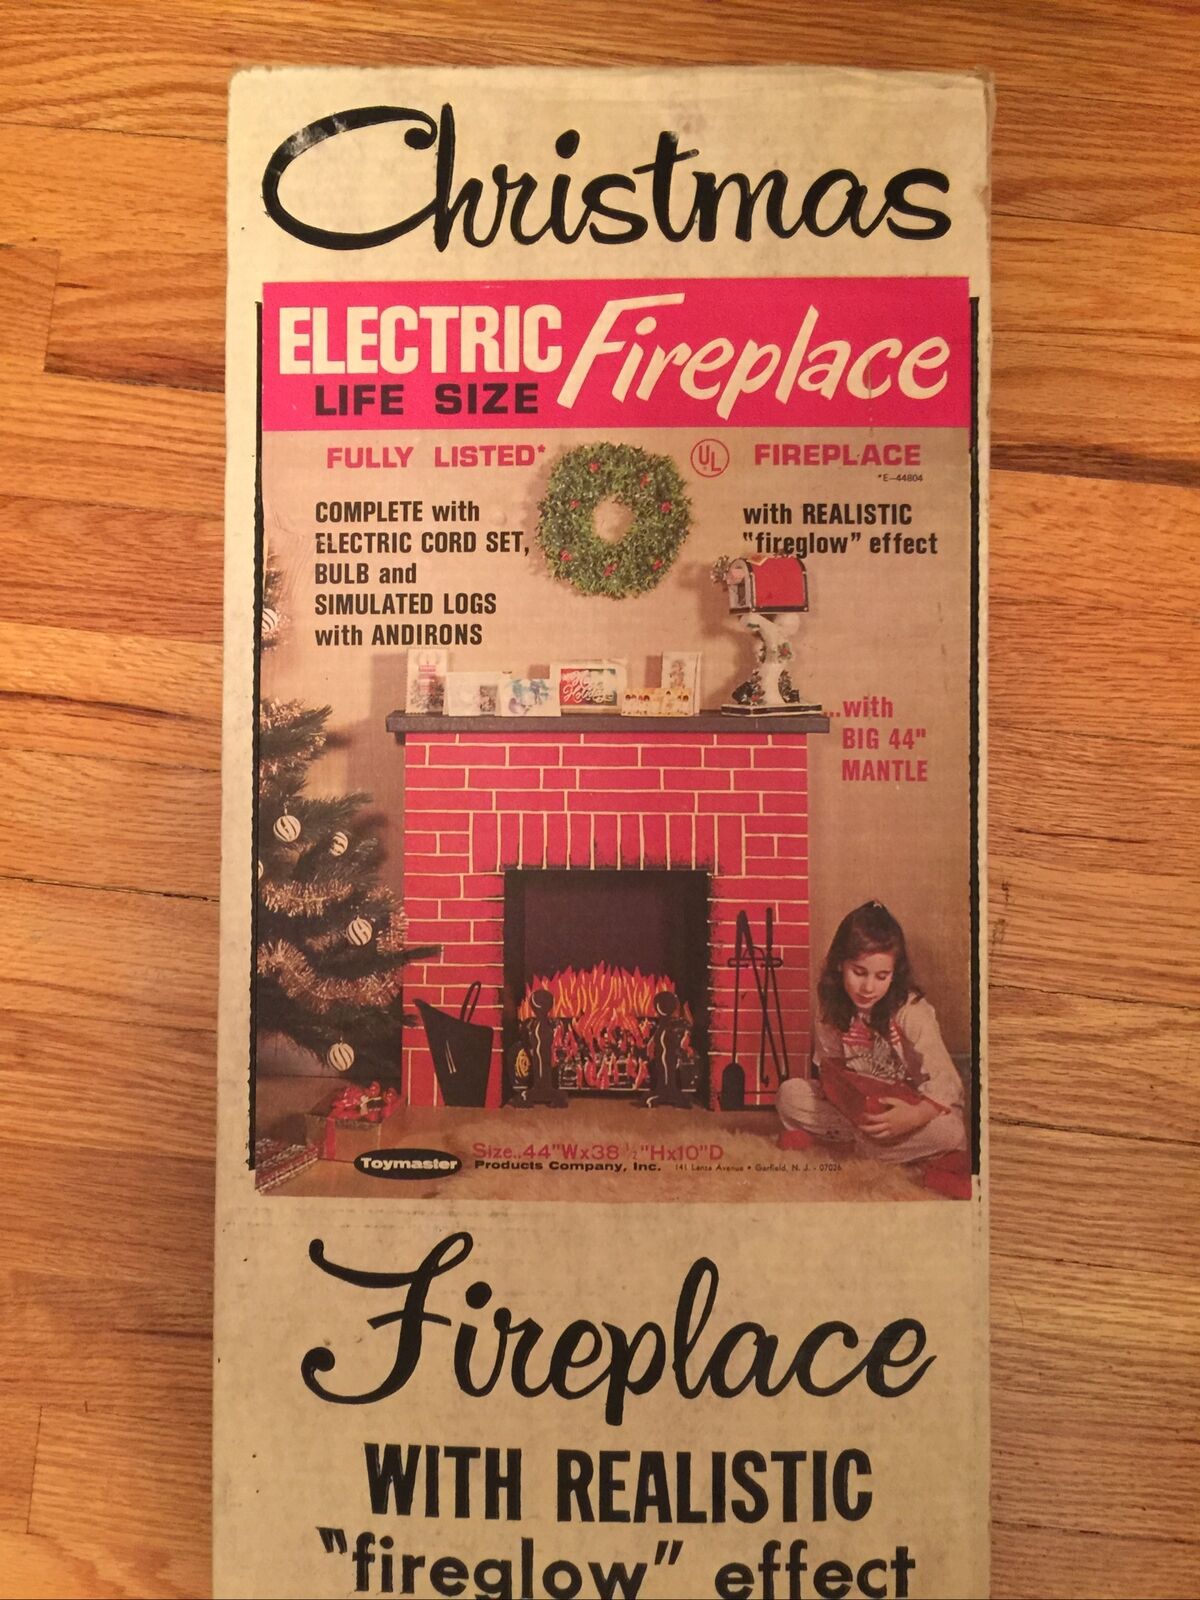 NEW TOYMASTER Christmas ELECTRIC LIFE SIZE FIREPLACE + mantle piece box #1100